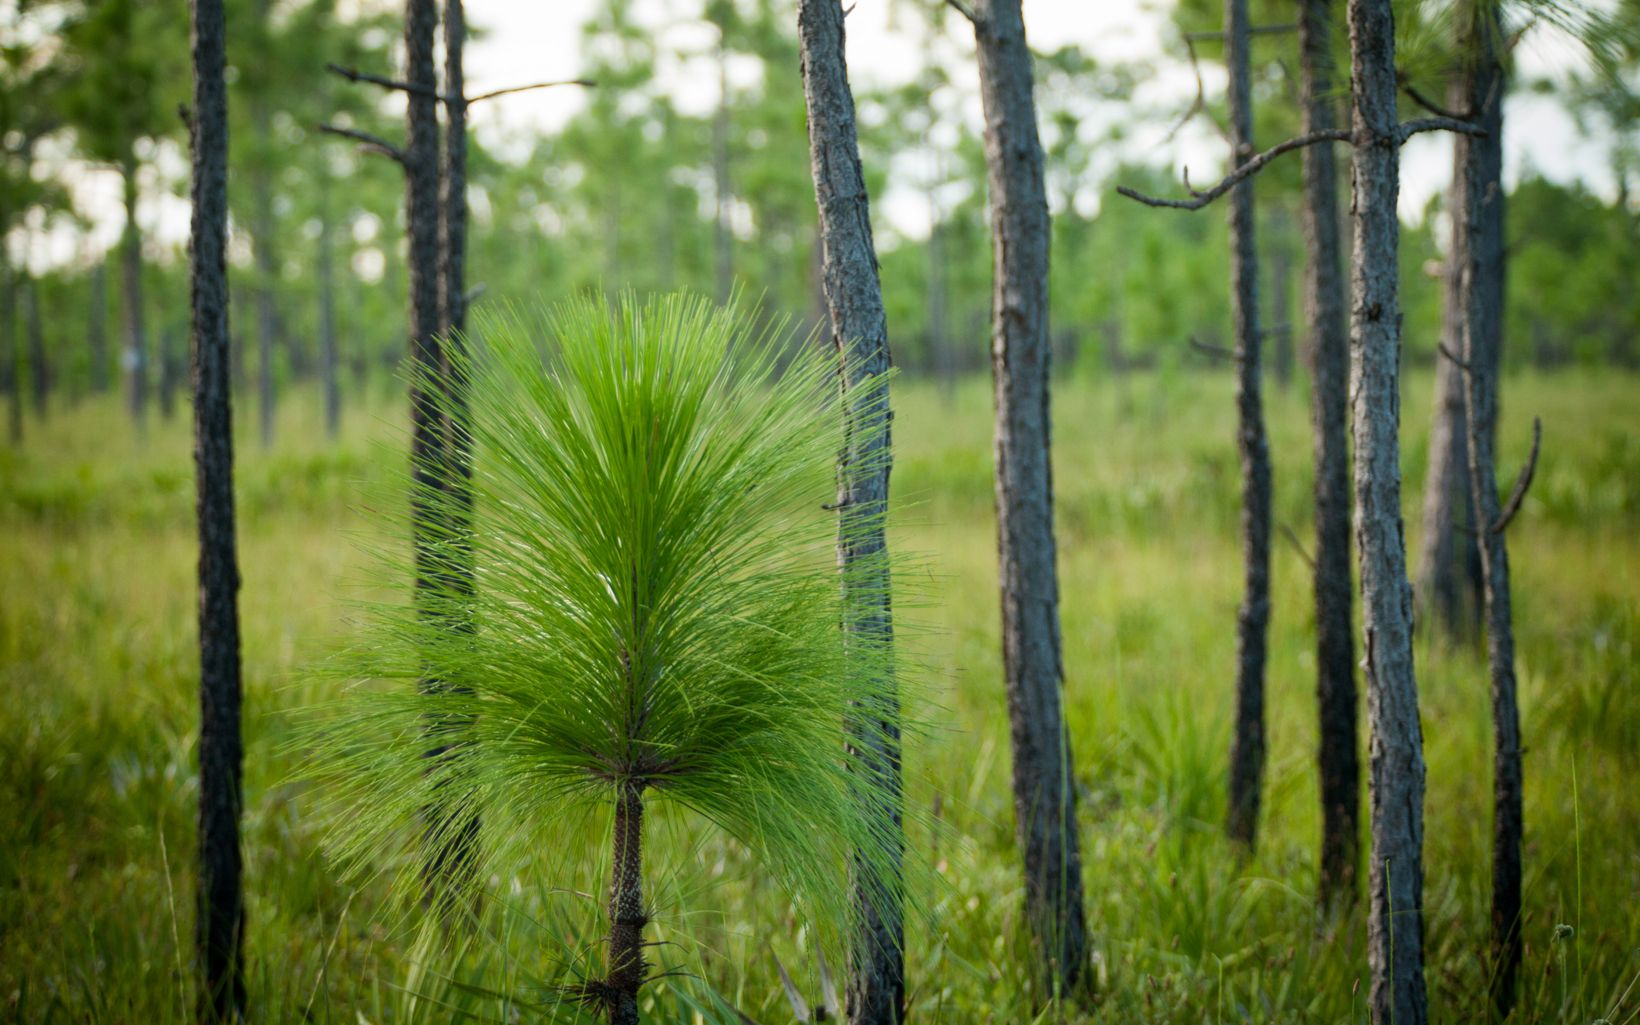 Longleaf Pine Habitat  This habitat once dominated an extensive geographic area in the southeast United States. Its protection is imperative to protect the biodiversity it supports. © Ralph Pace